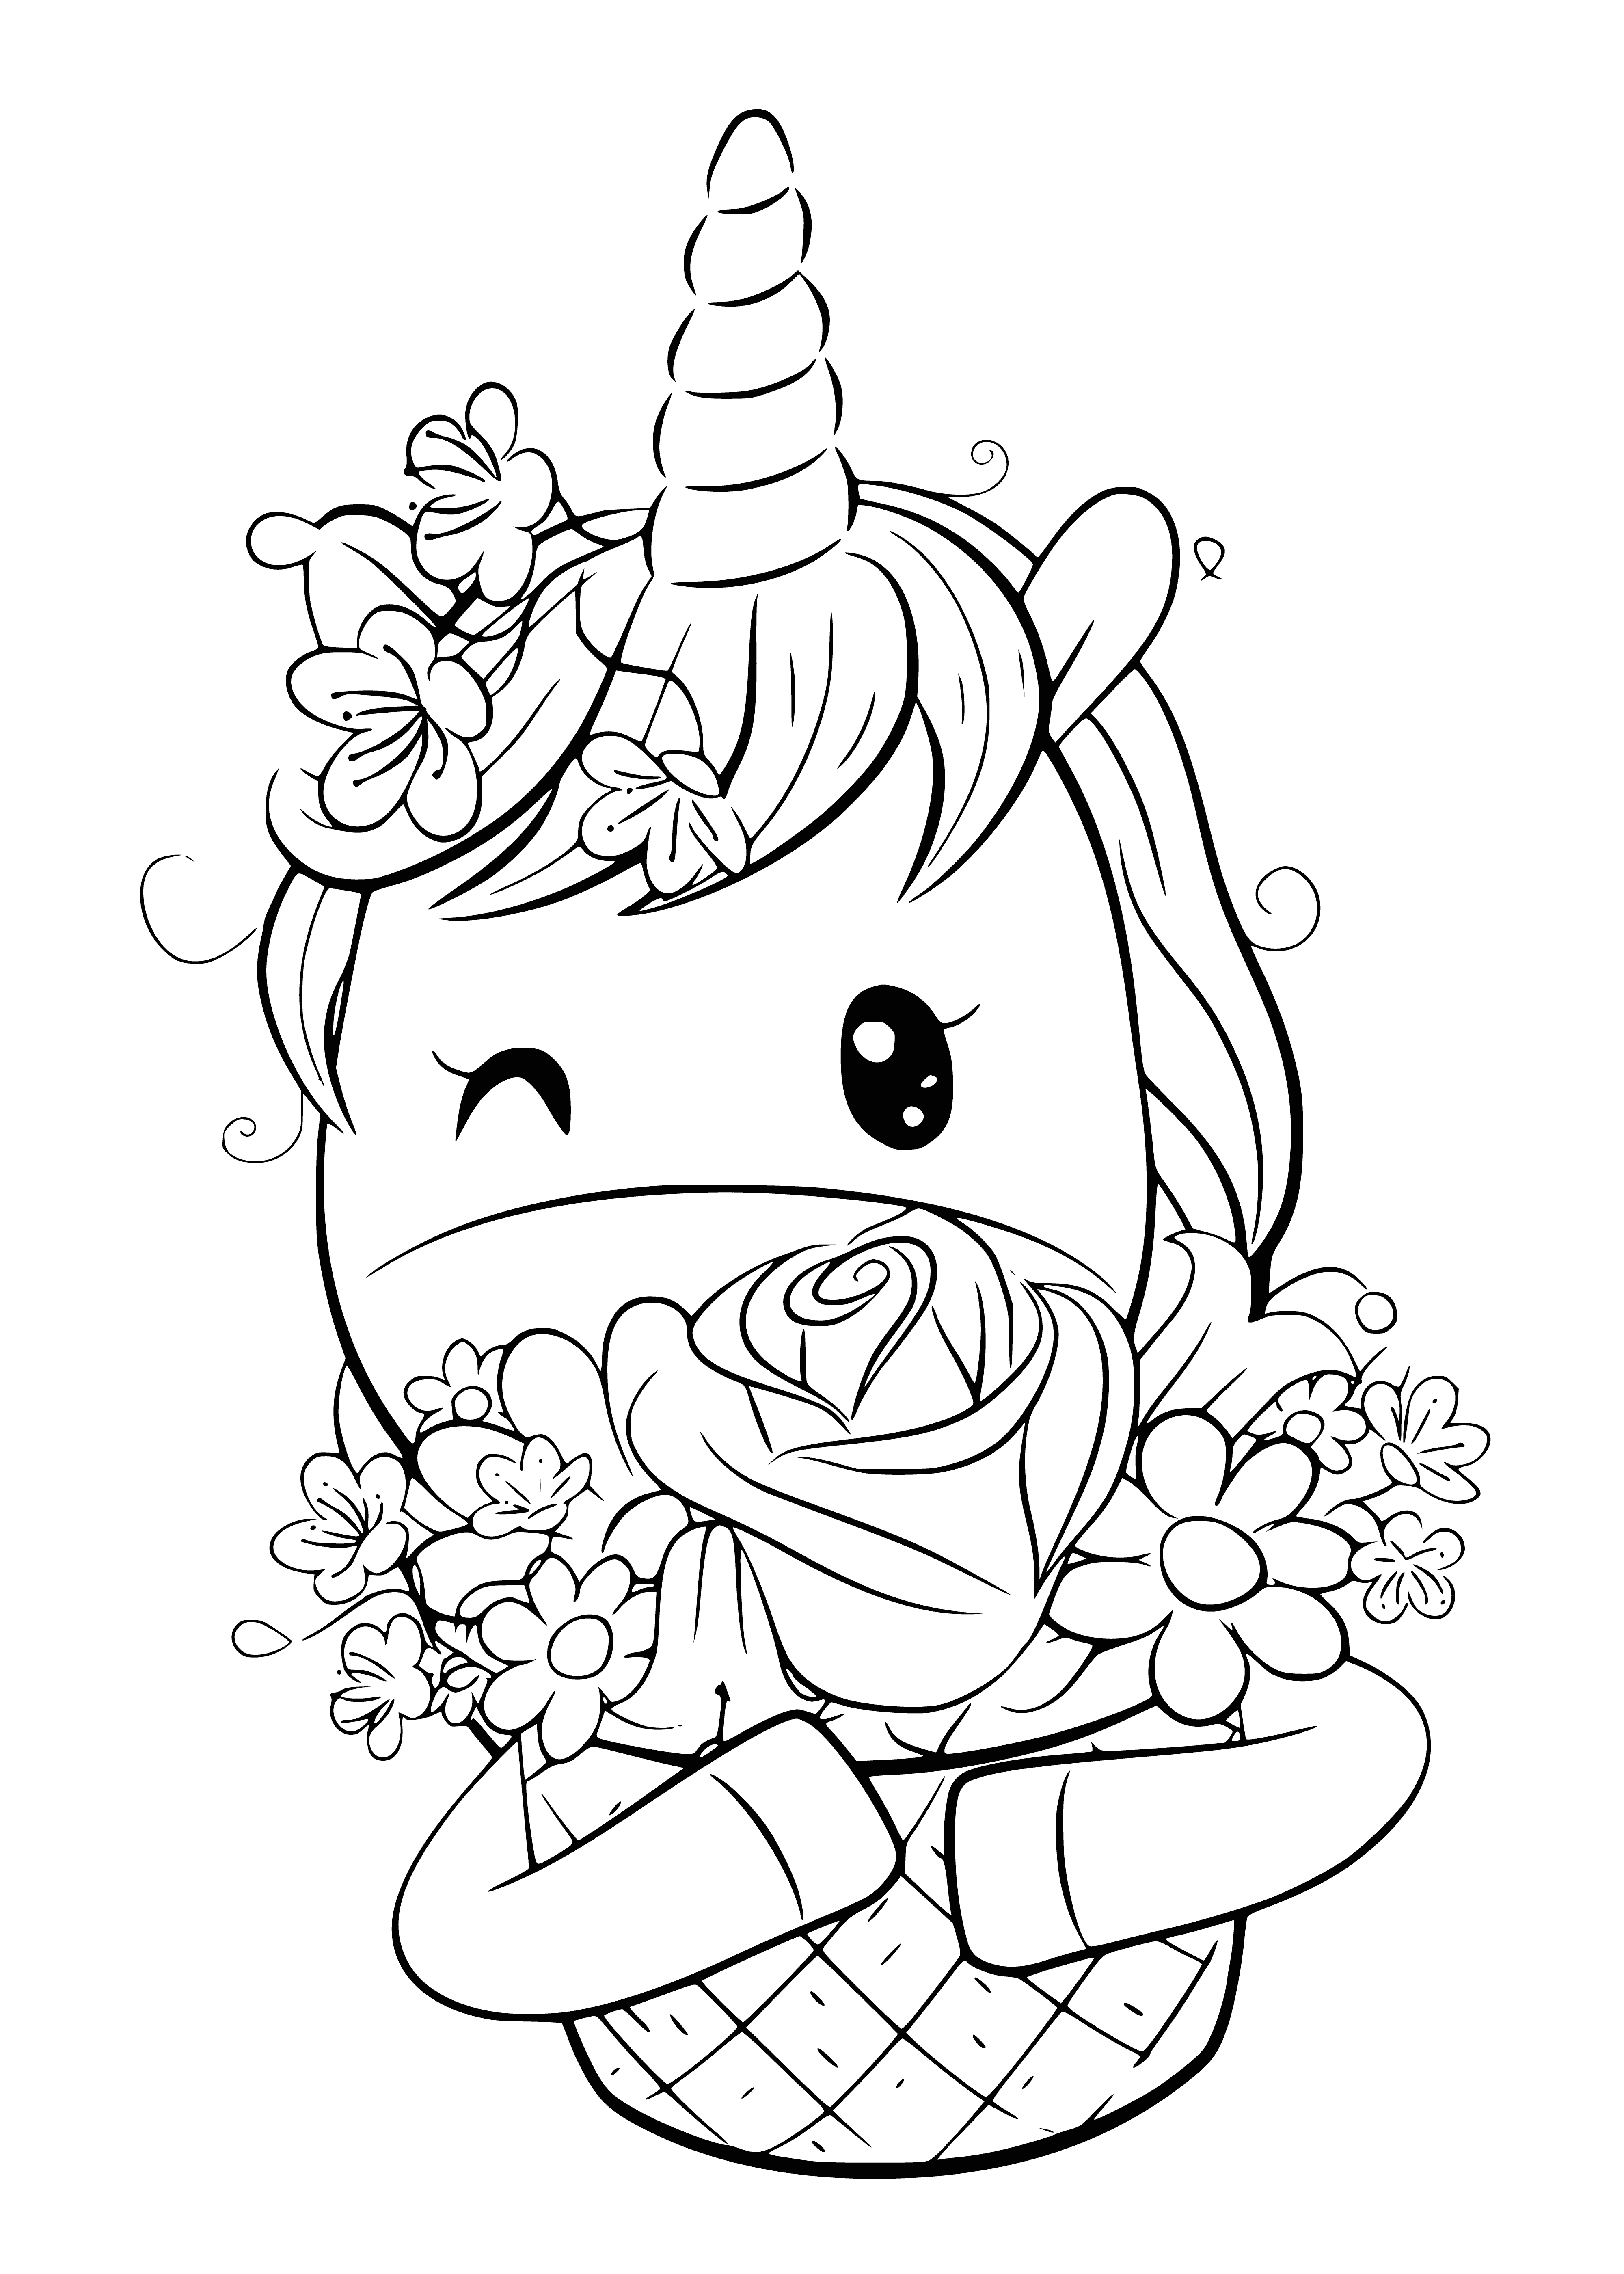 Unicorn with flowers coloring page